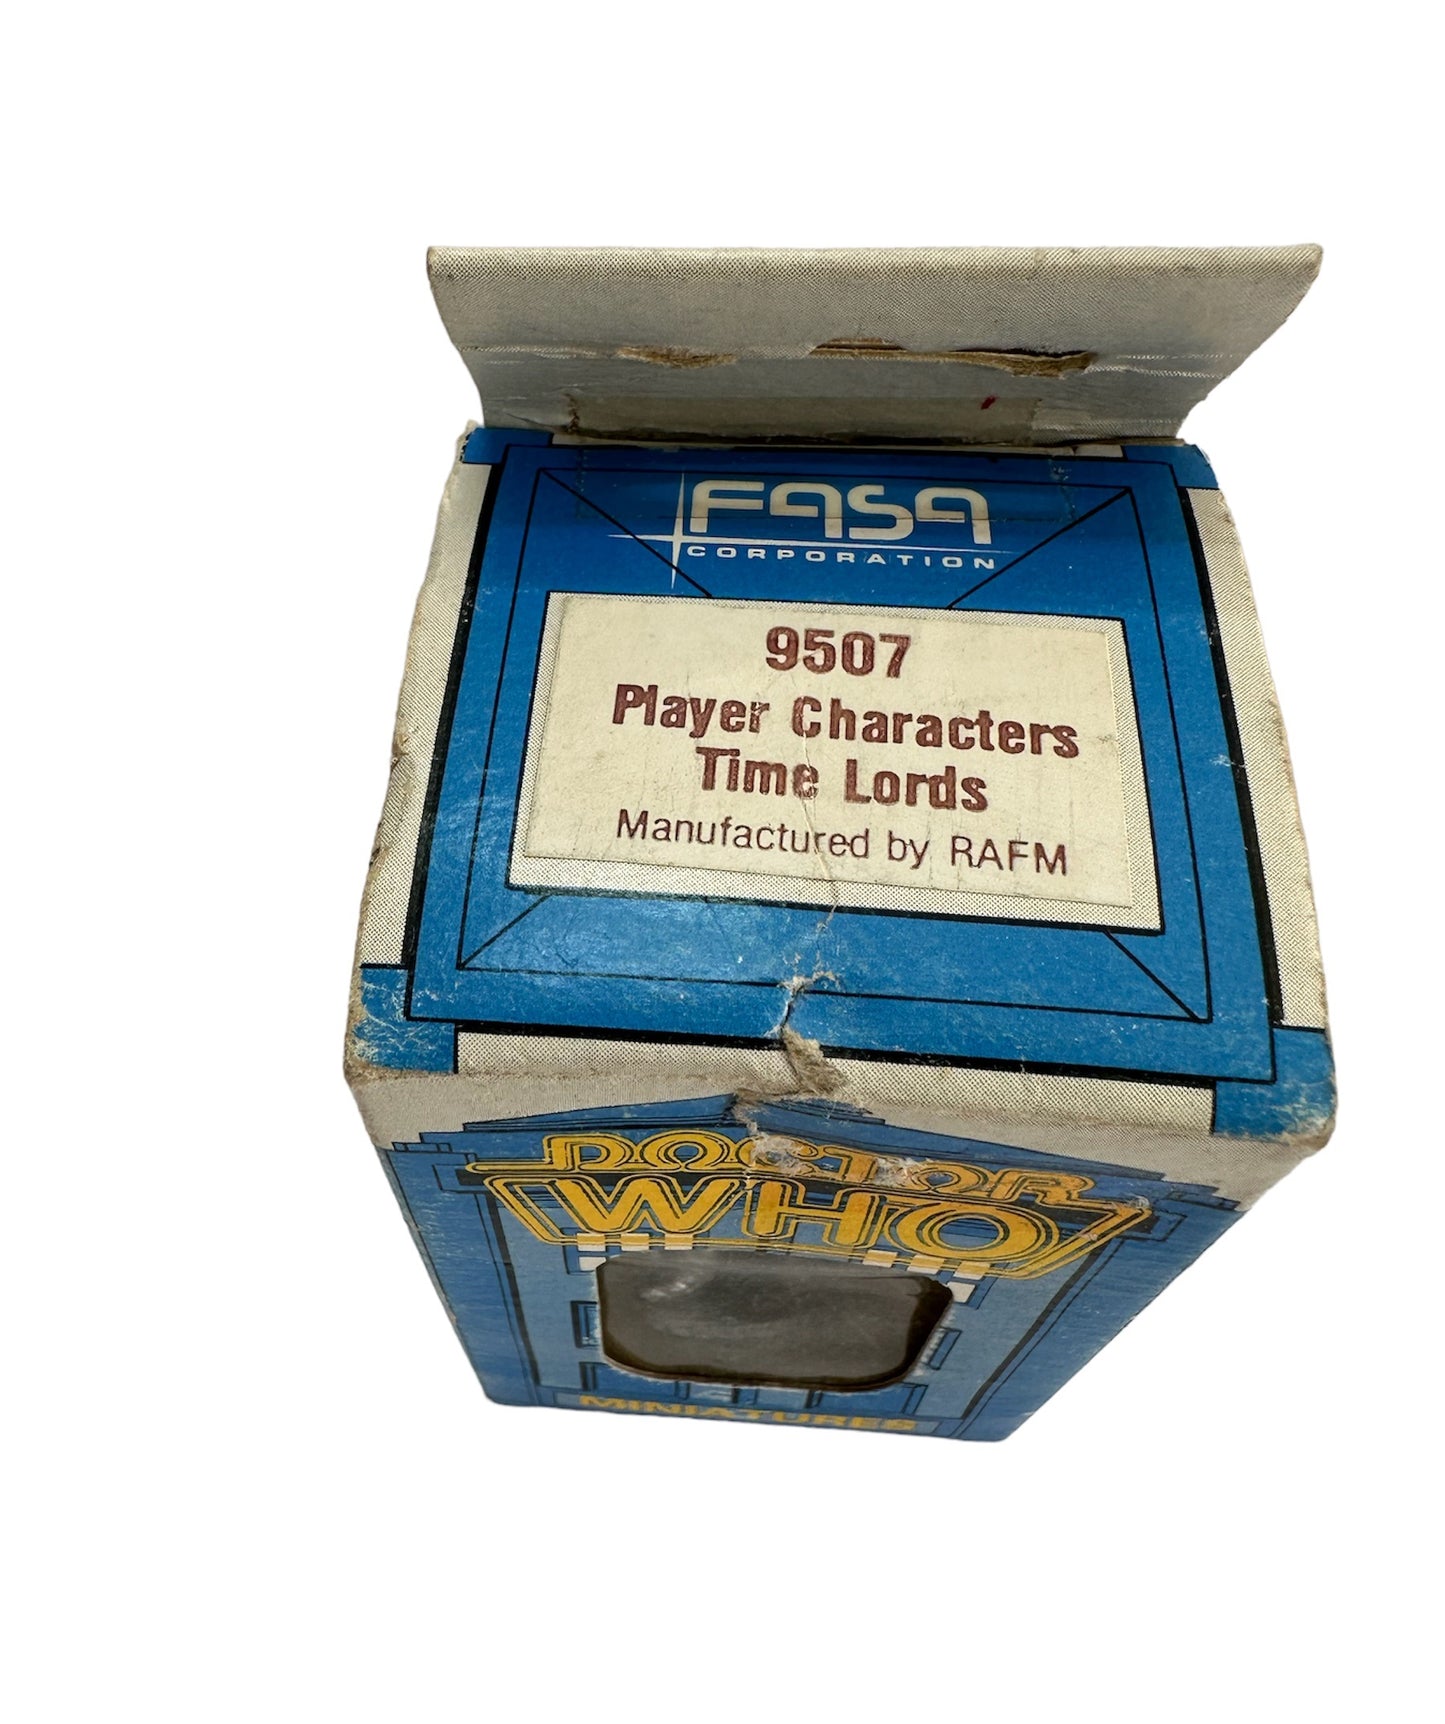 Vintage FASA Corp 1986 Doctor Dr Who Citadel Miniatures Metal Figures No. 9507 - Player Characters The Time Lords - Set Of 3 Figures - In The Original Box - Shop Stock Room Find